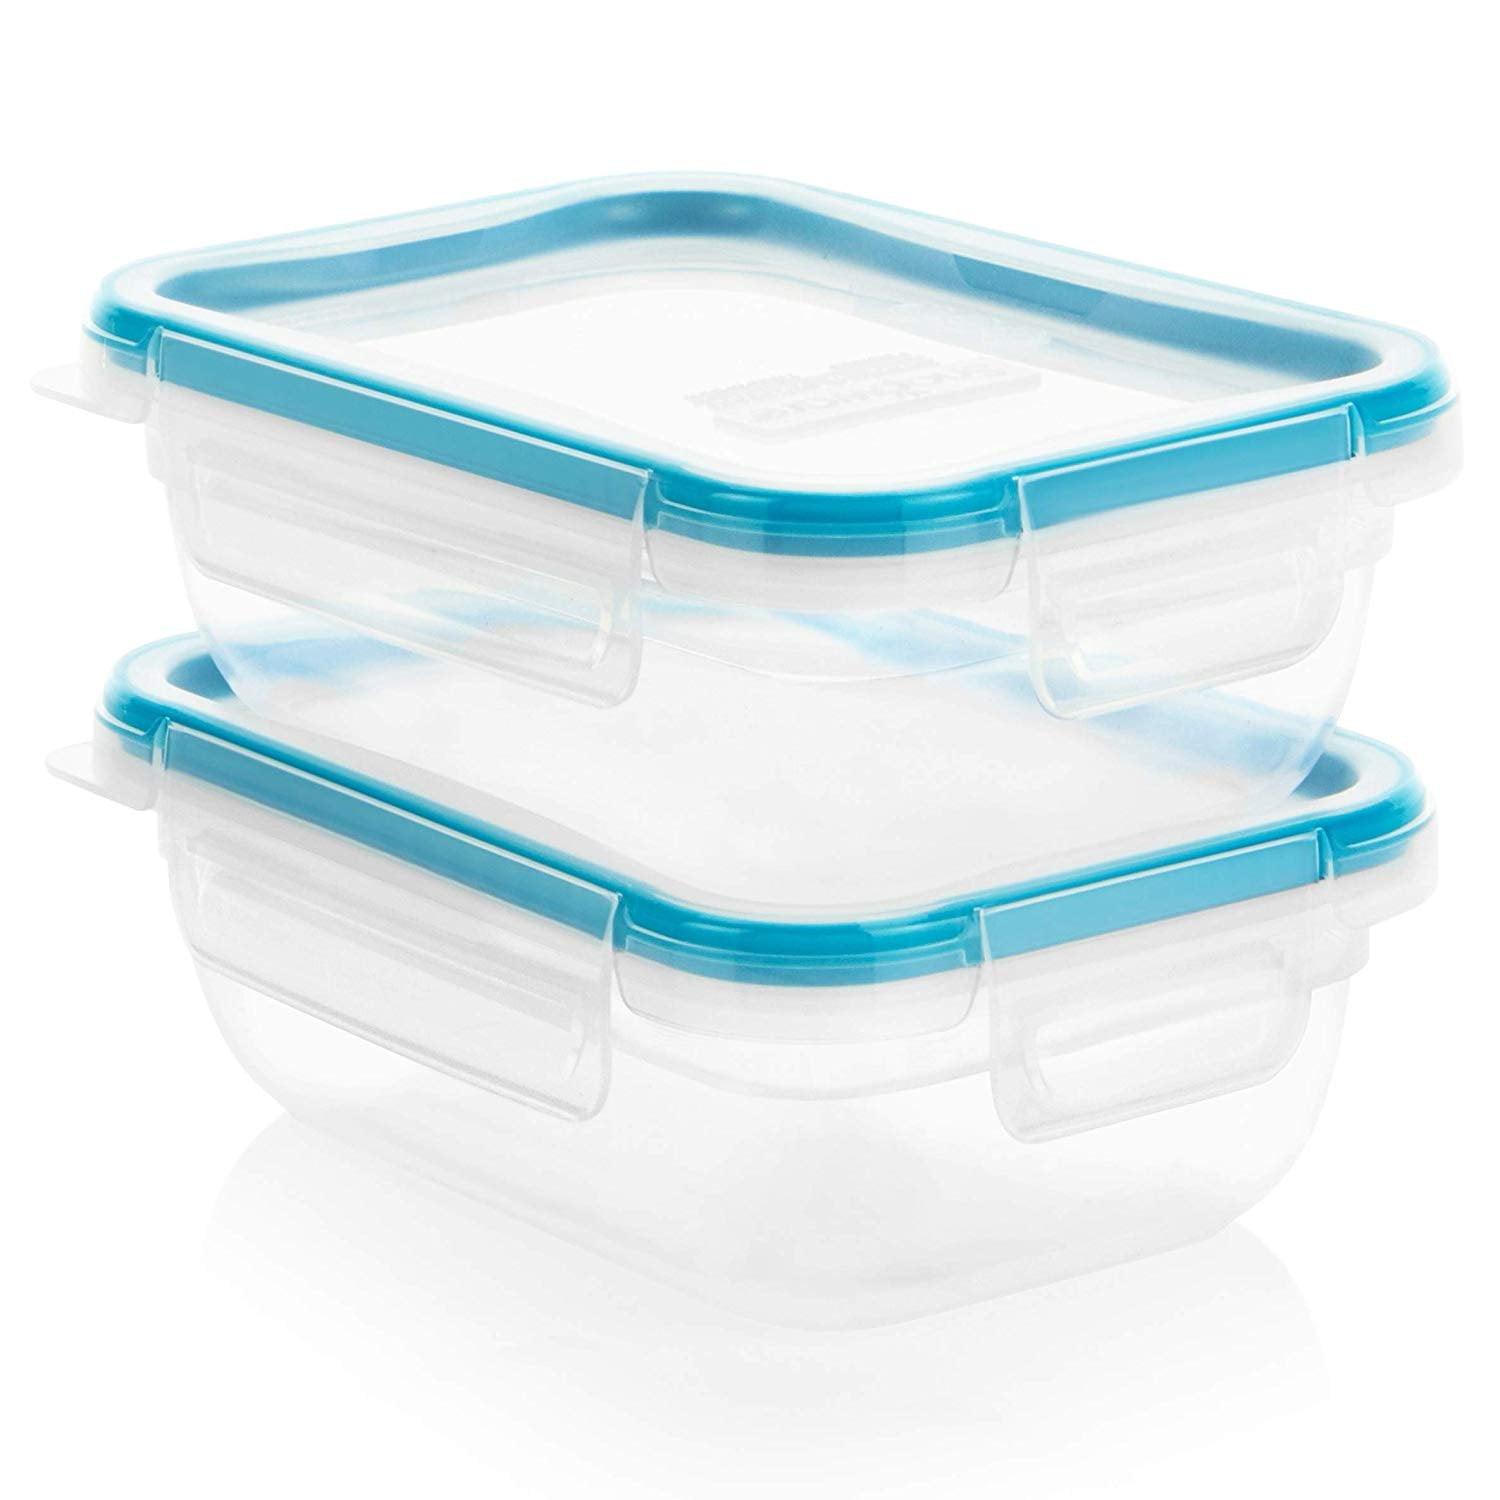 SNAPWARE Total Solution Lids Storage Container Round 3.86 Cup - 1 ct pkg